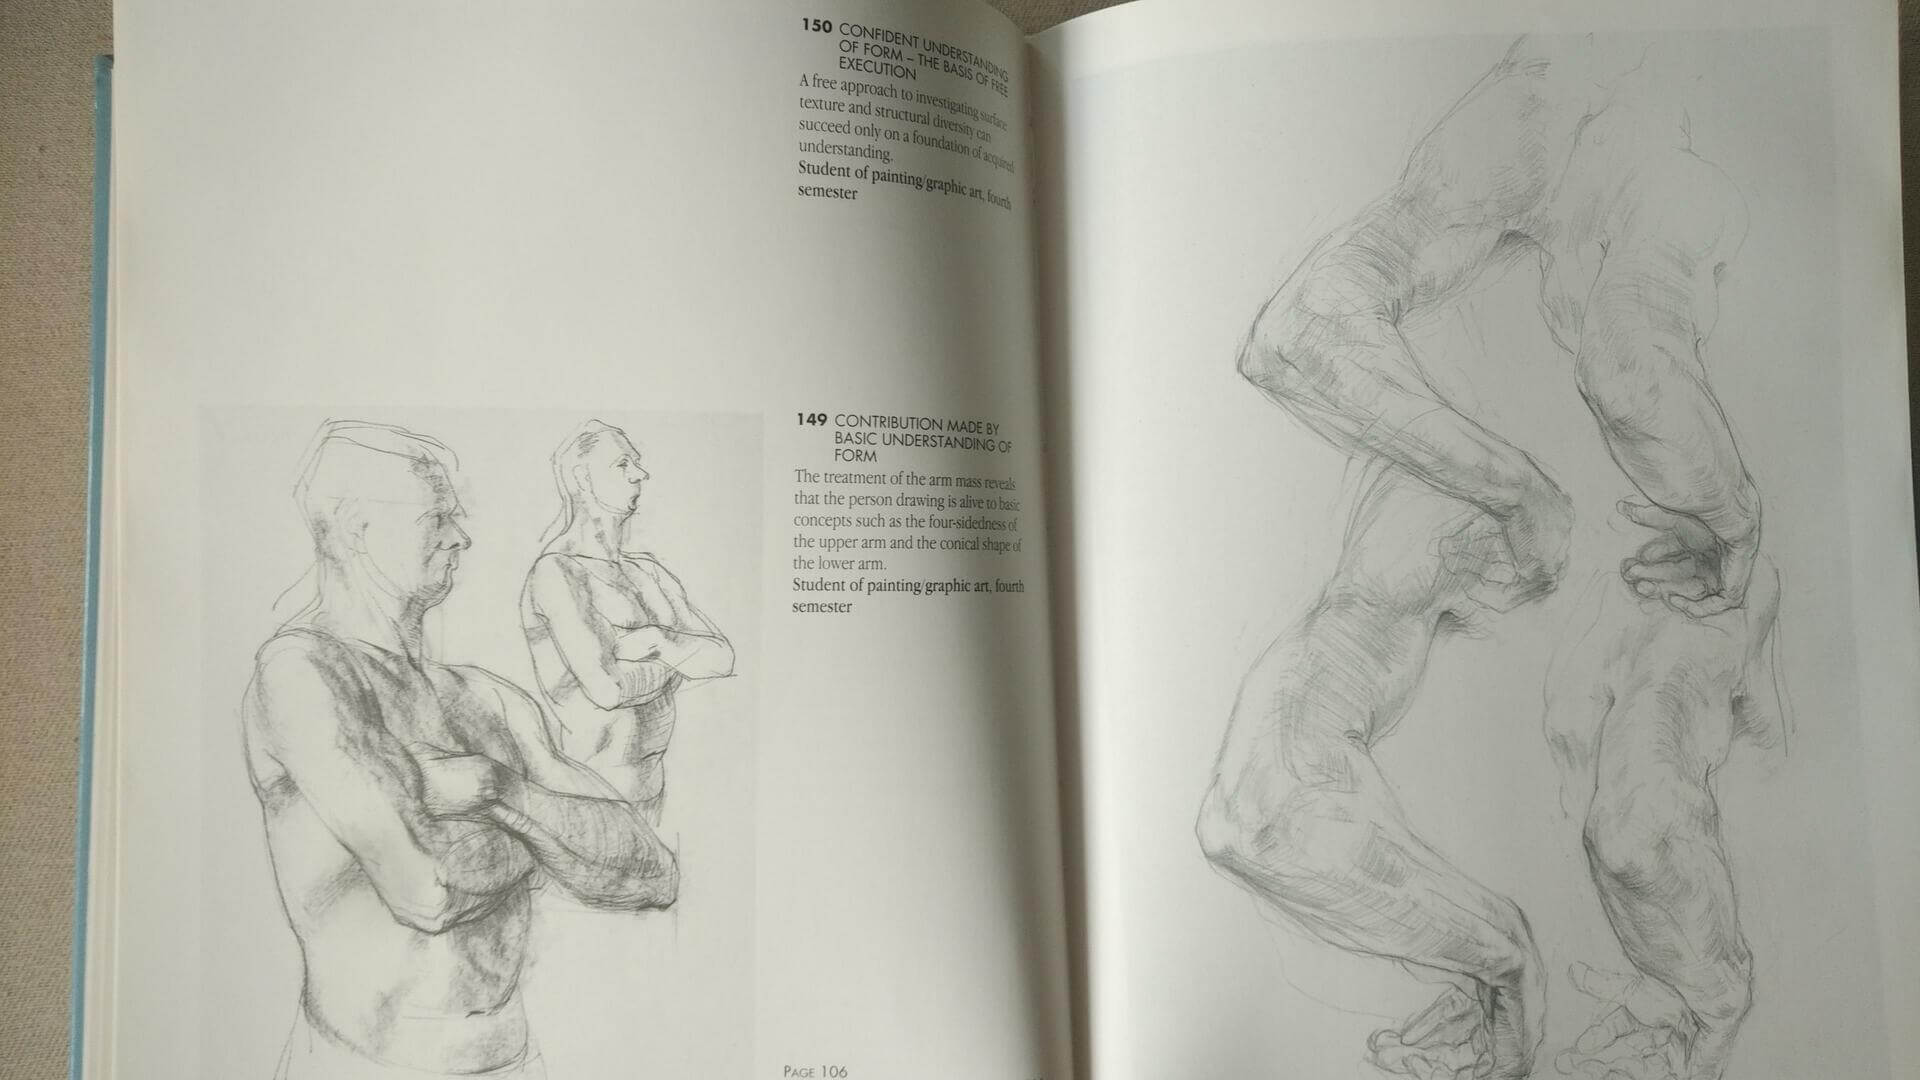 The Artst's Guide to Human Anatomy : An Illustrated Reference to Drawing Humans book by G Bammes hardcover 1994 by Transedition Books ISBN-10: 0785800549